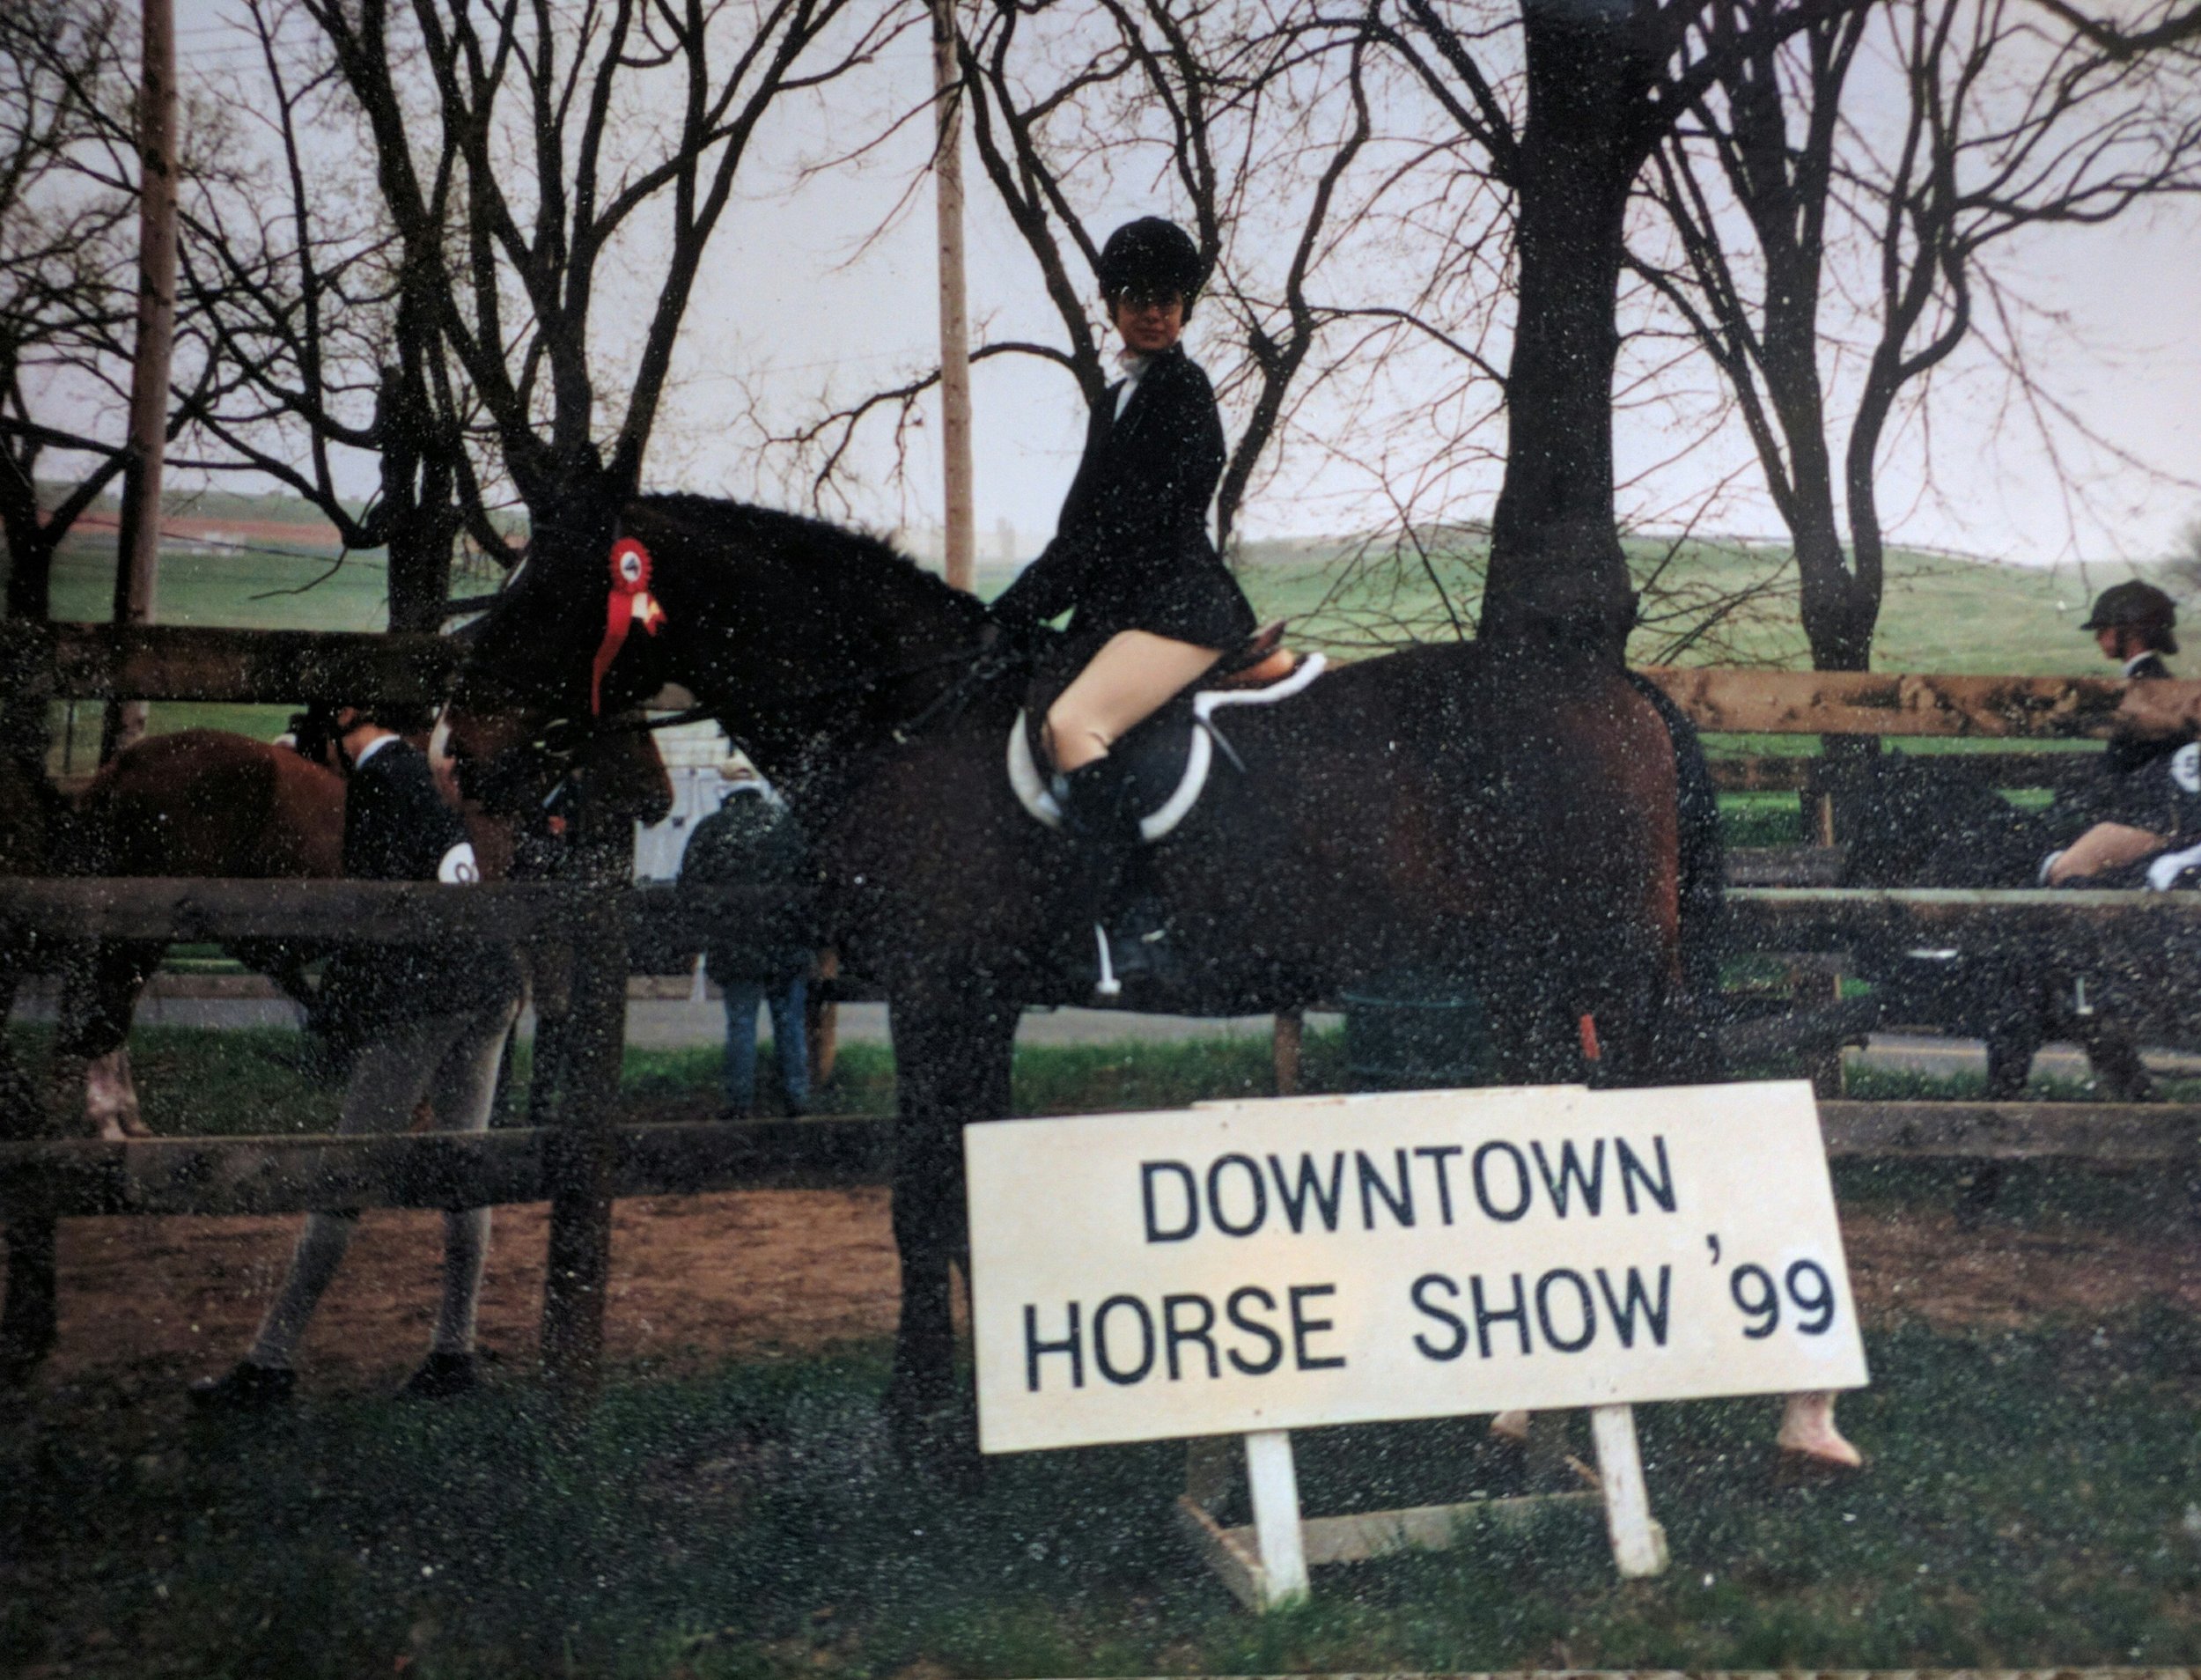 Downtown horse show sparky and real clarke 199.jpg